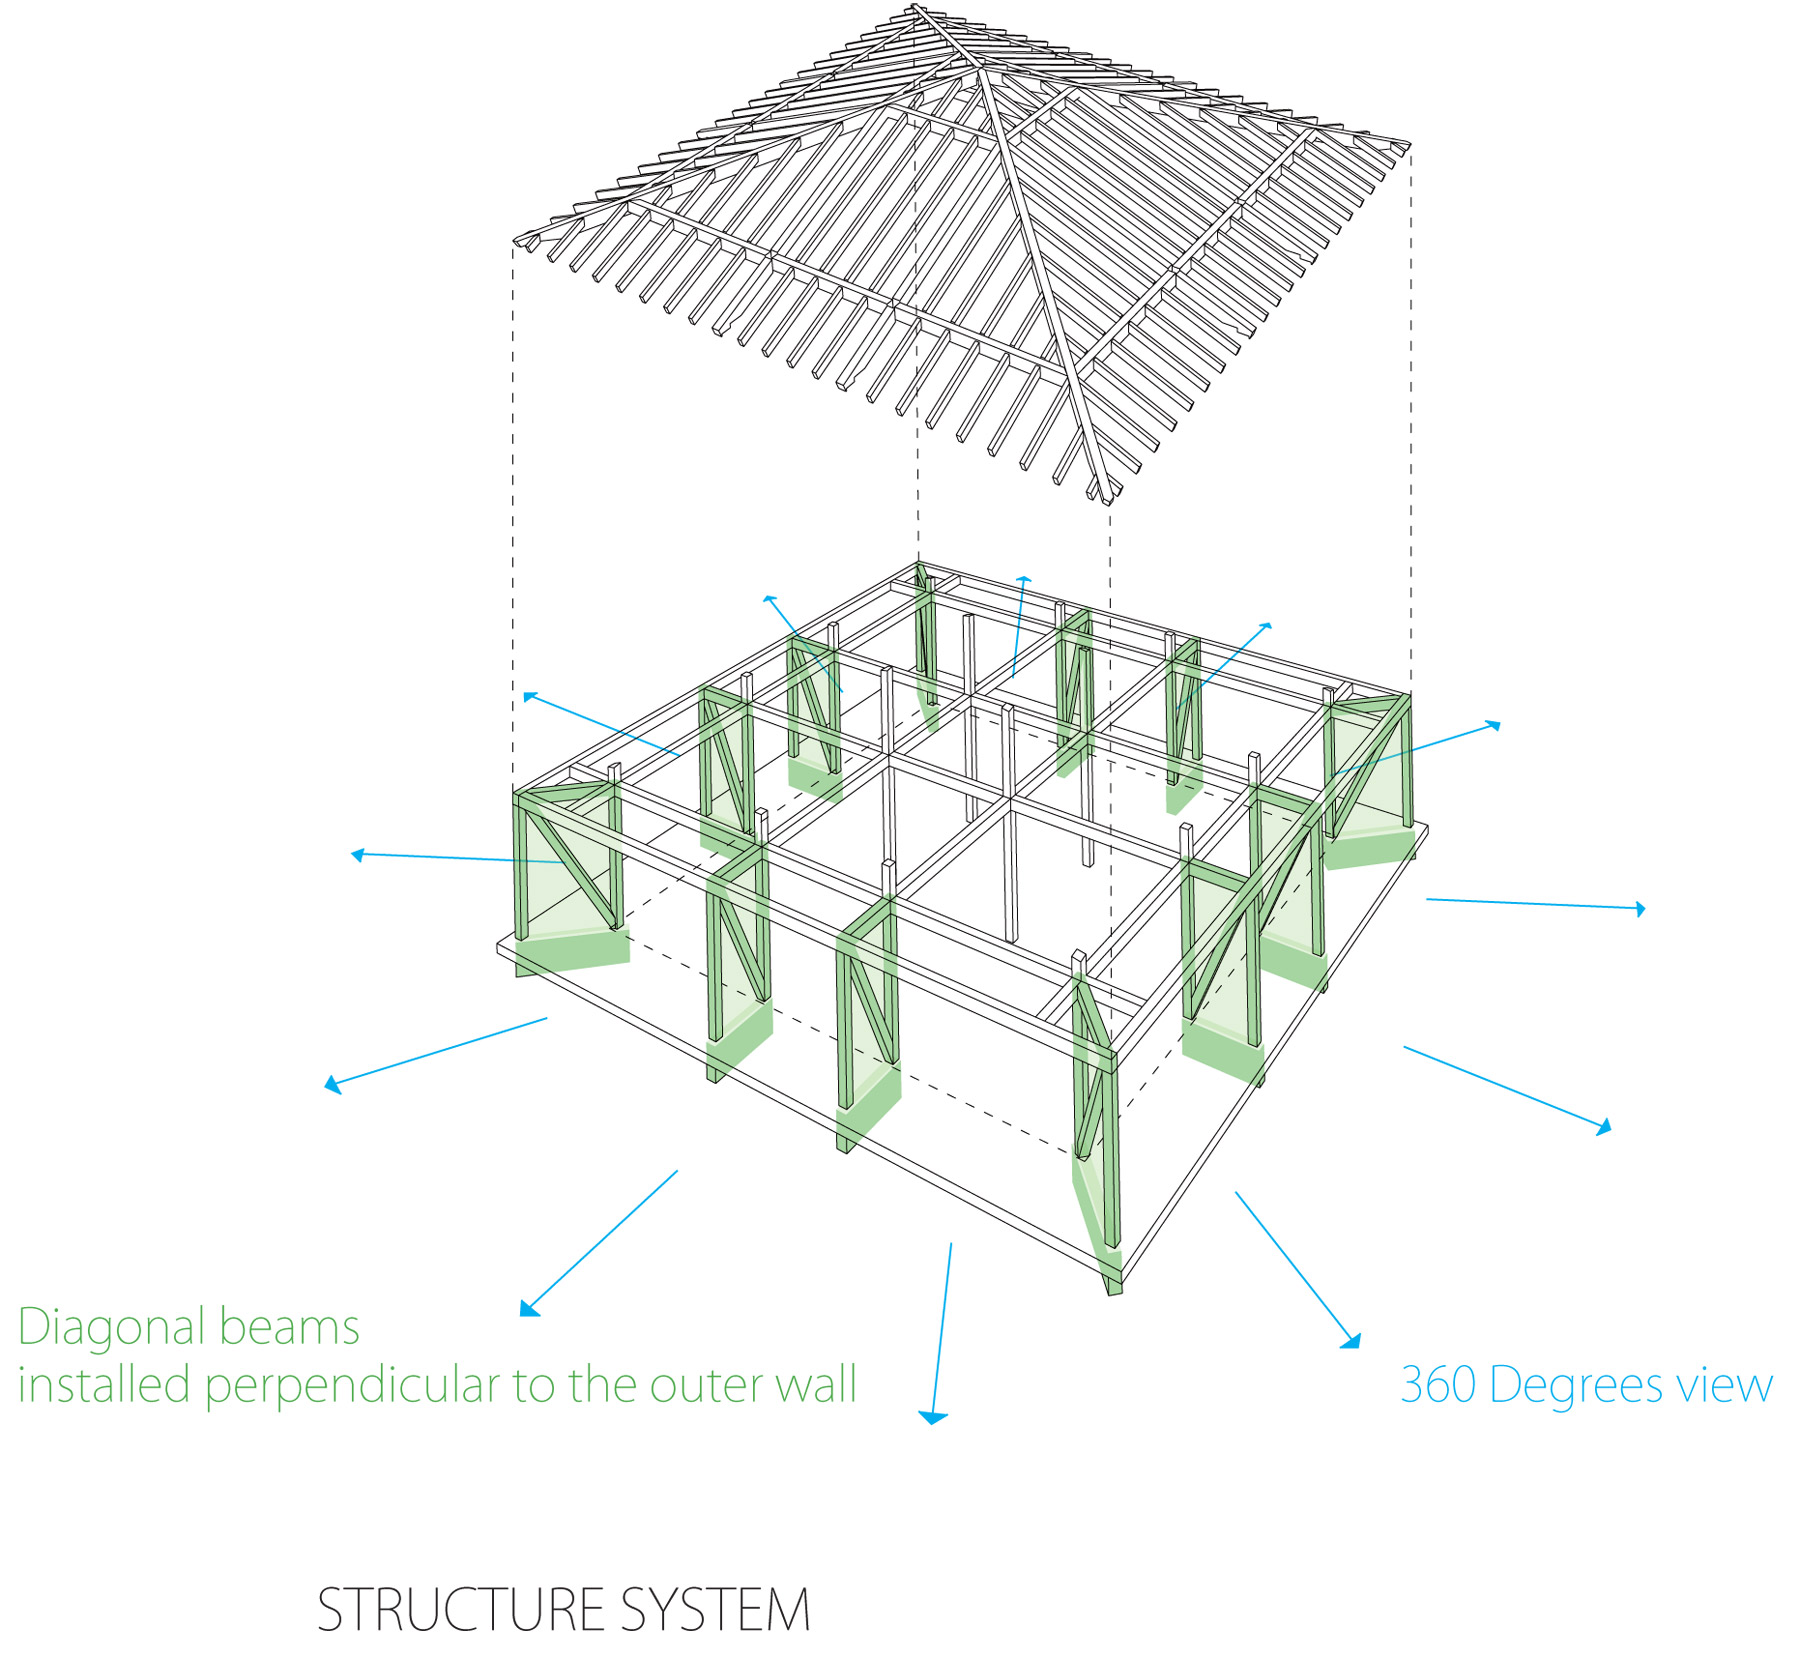 STRUCTURE SYSTEM